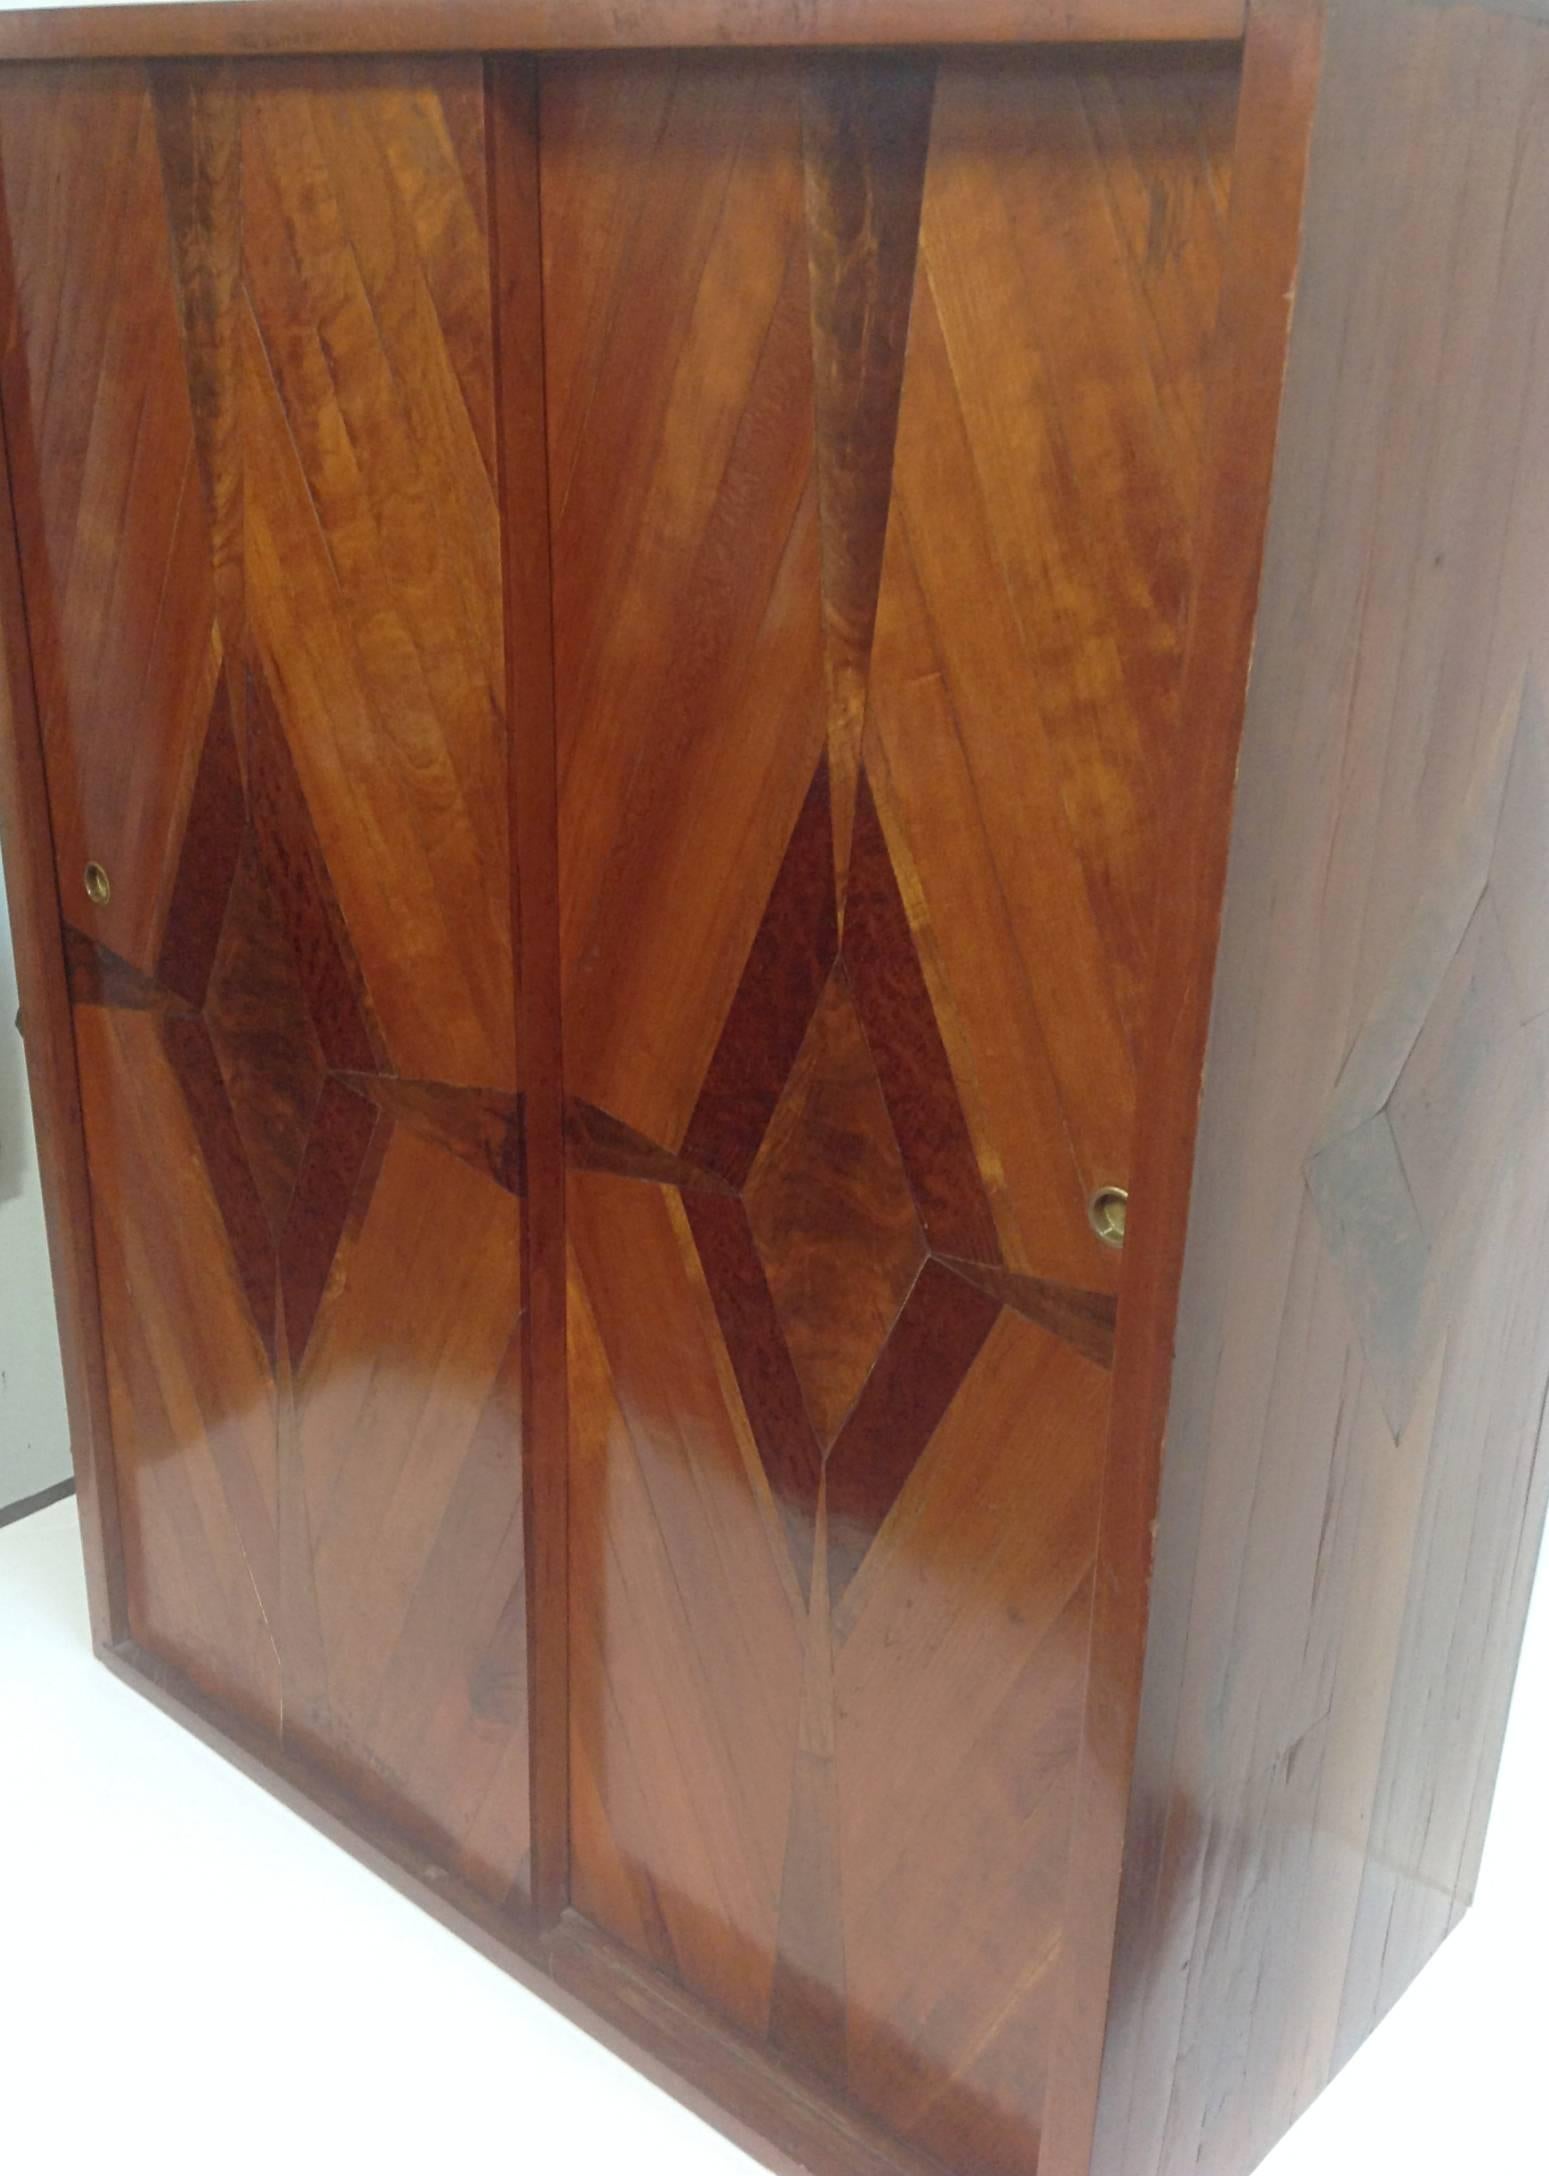 Bespoke hanging cabinet. Thick mixed fruit and hardwood veneers over pine case with solid cherry top. Neoclassical diamond details on sliding doors and side panels. Fixed interior shelves.